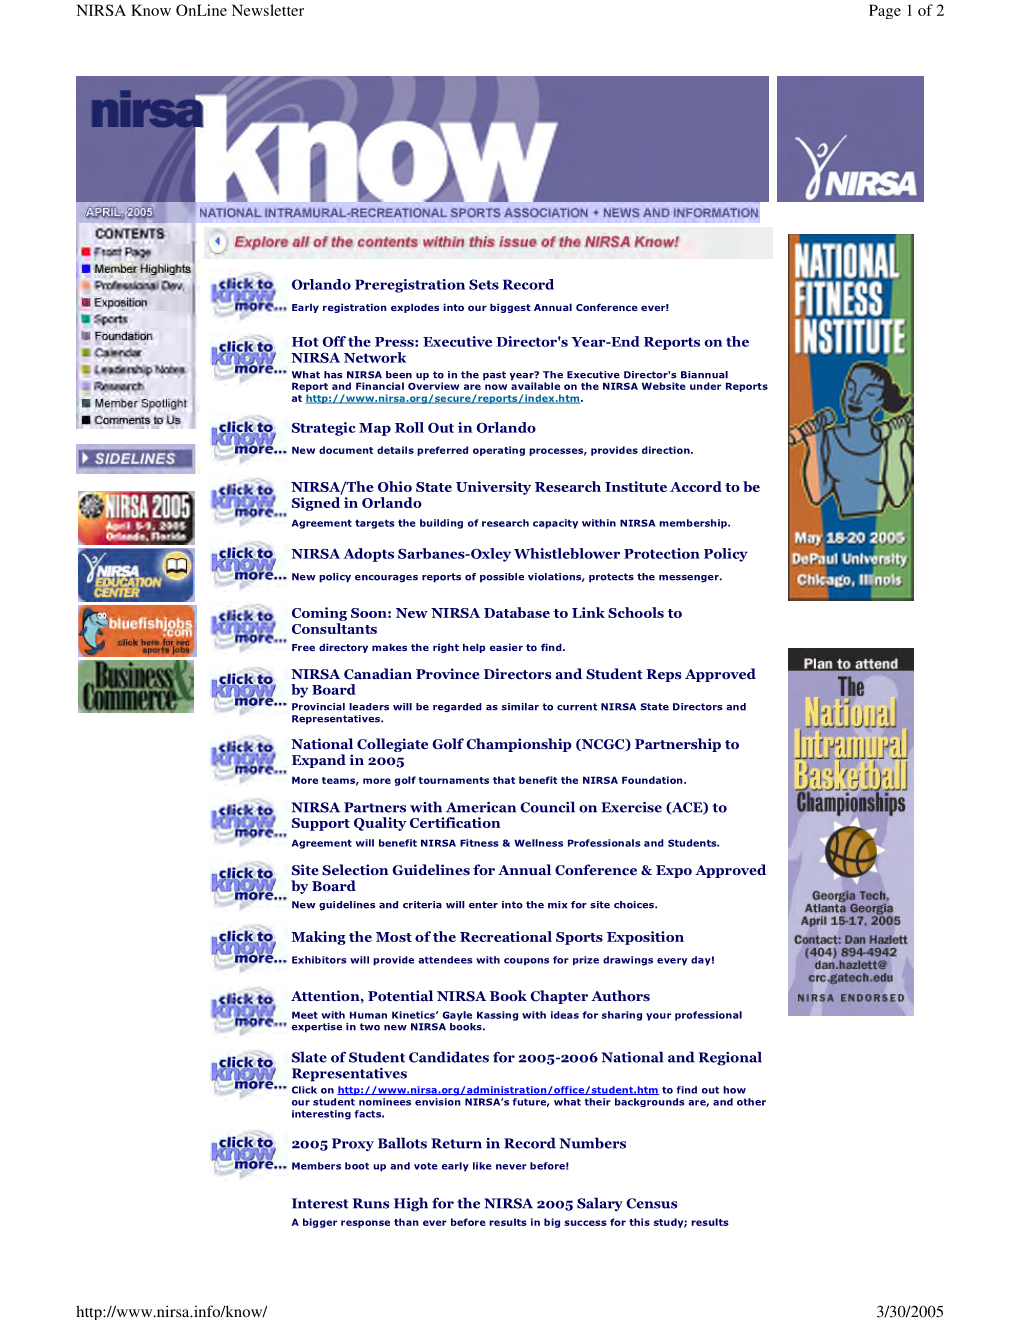 Page 1 of 2 NIRSA Know Online Newsletter 3/30/2005